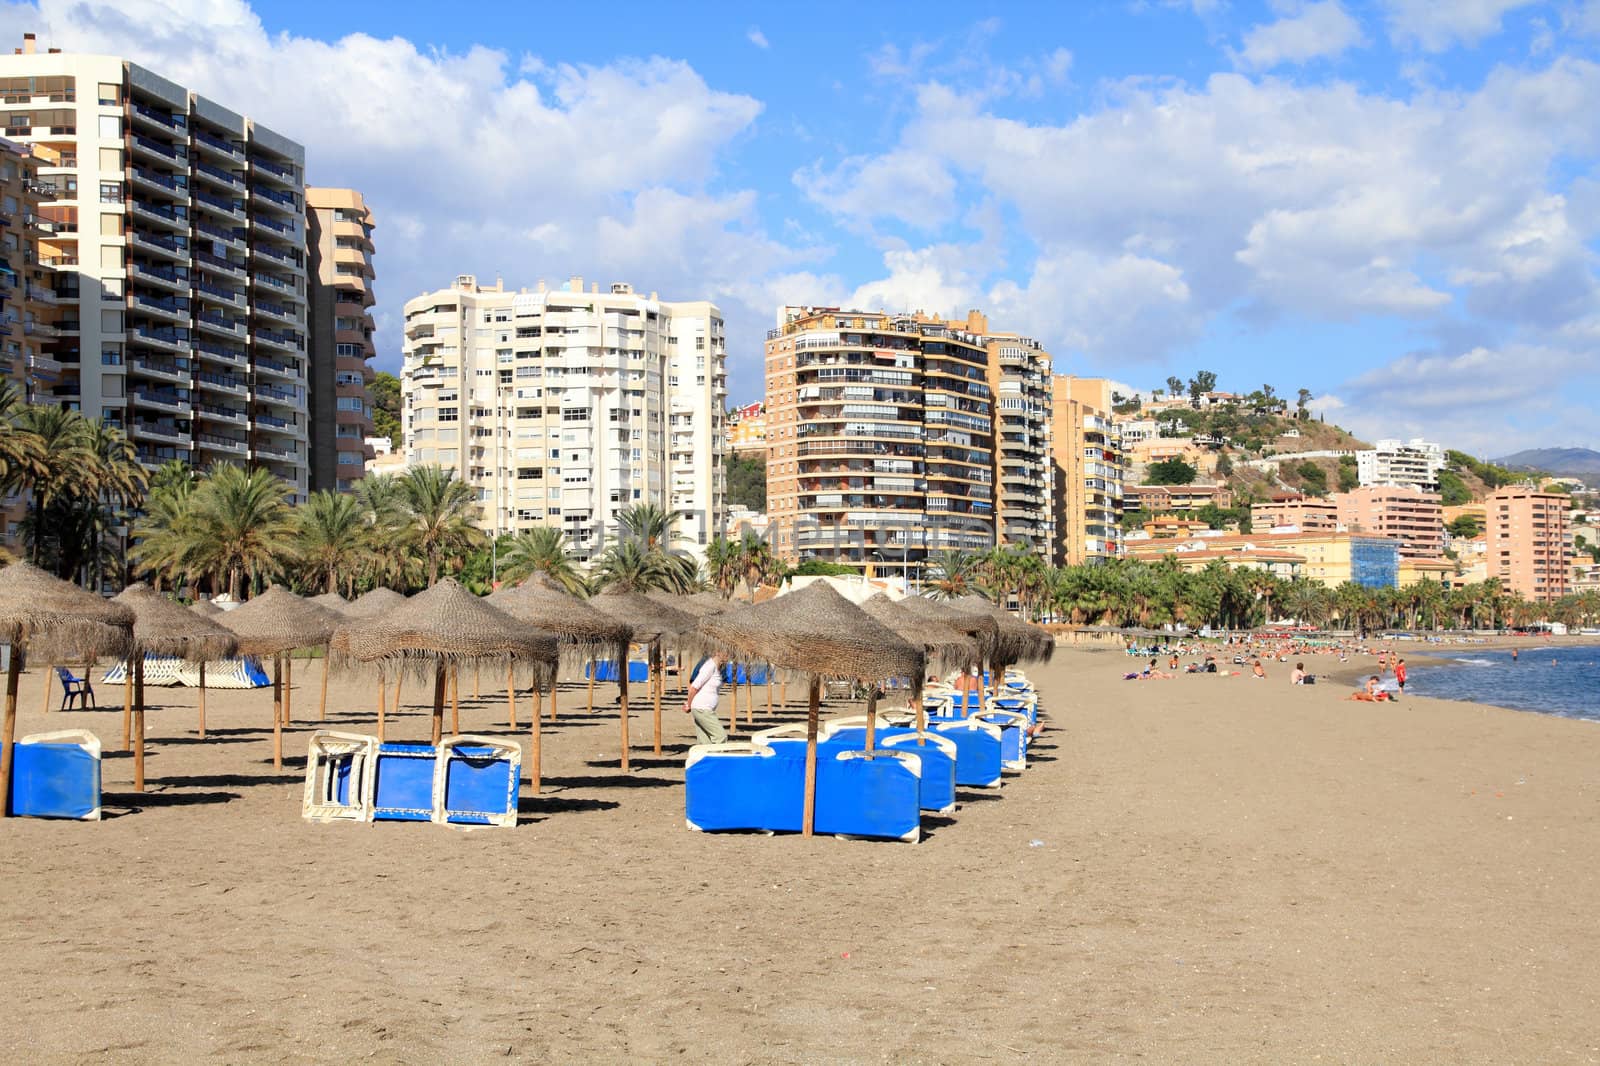 Malaga in Andalusia region of Spain. Suntanning chairs on a sandy beach.